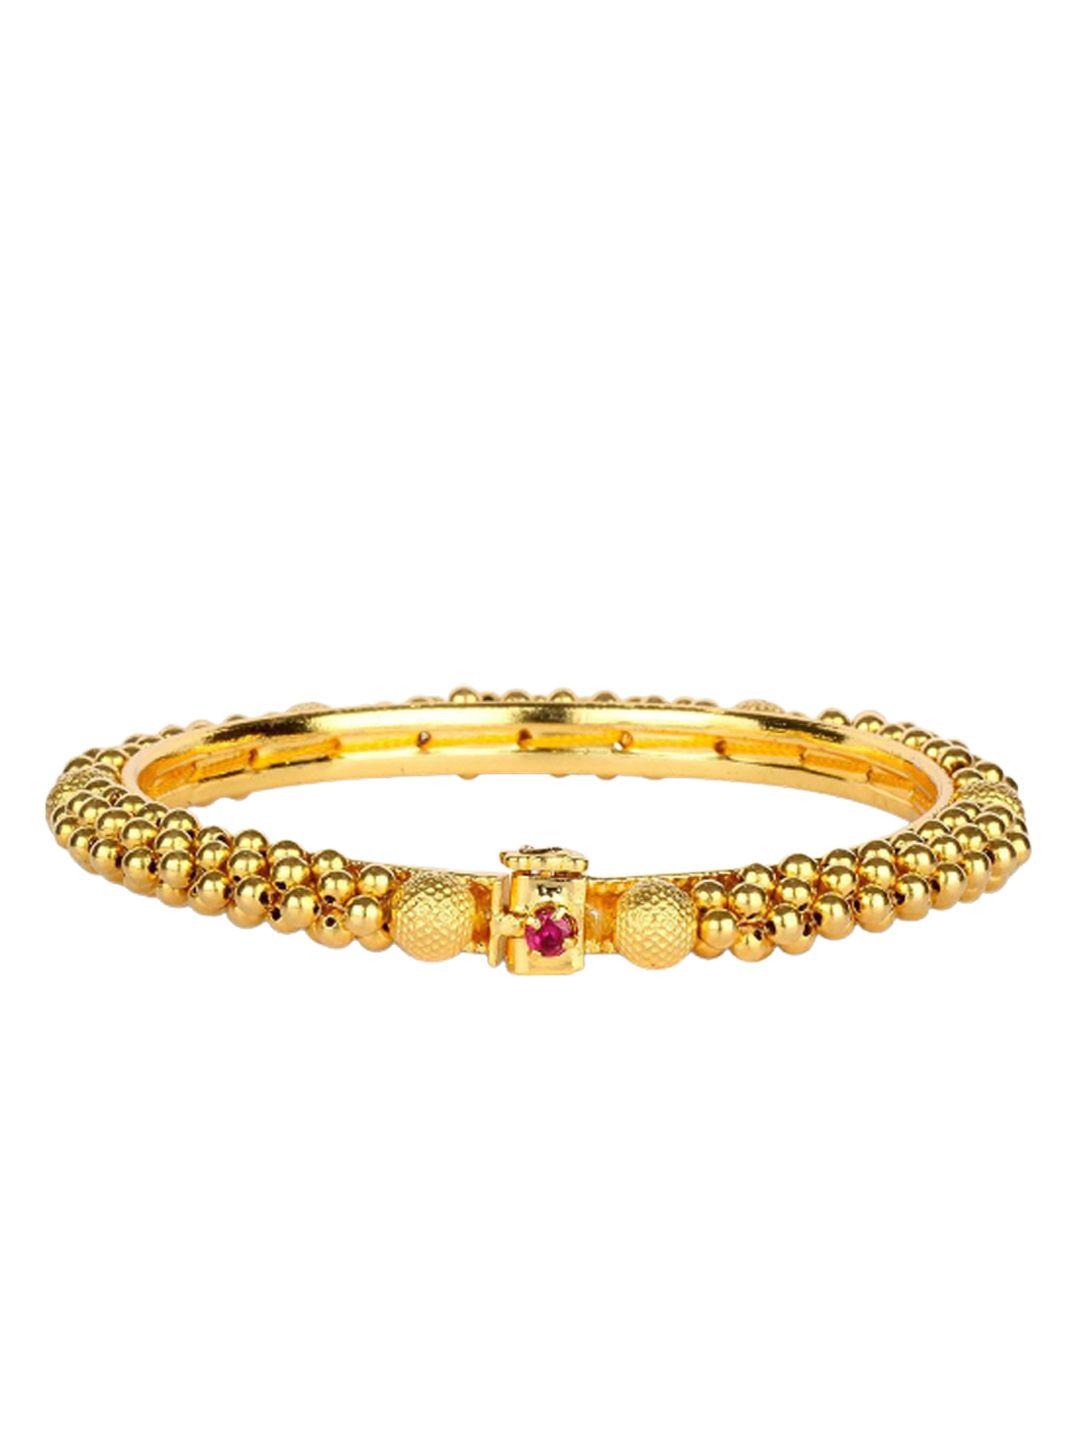 candere a kalyan jewellers company 22kt gold tushi bangle - 2.19 gm